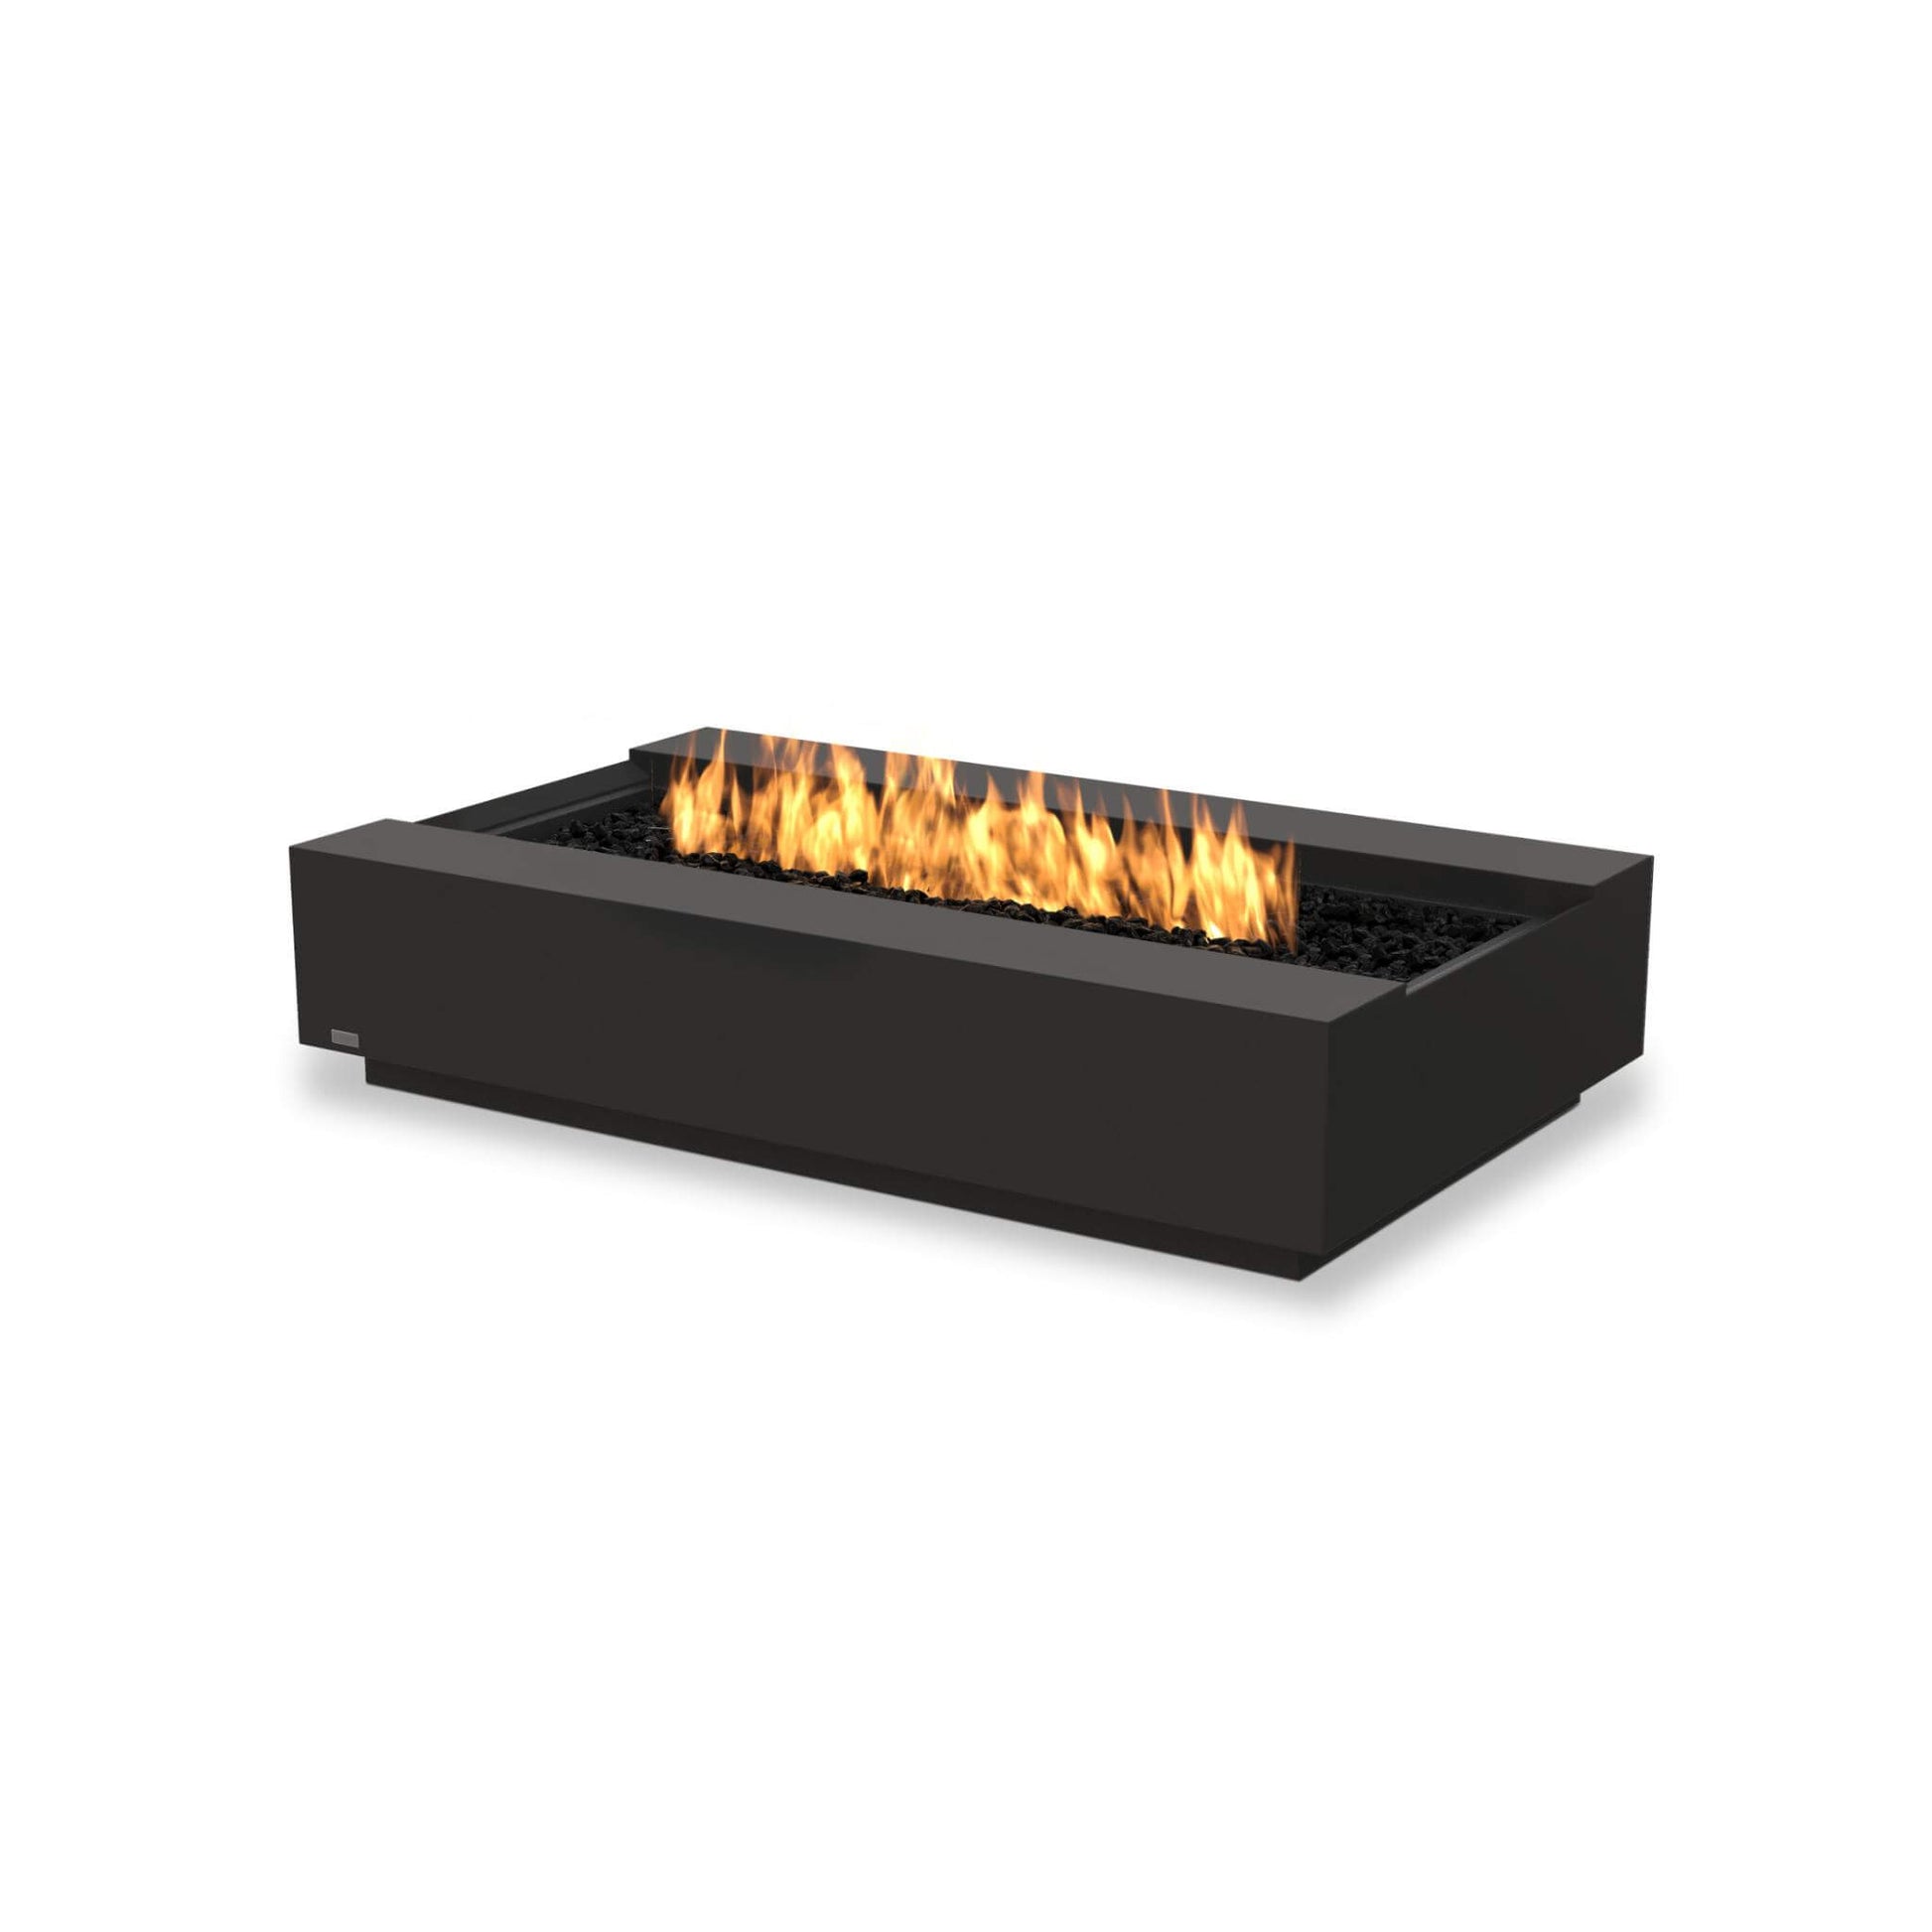 Cosmo 50 Linear Concrete Gas Fire Pit Coffee Table with  in Graphite black for Indoor & Outdoor Heating by Ecosmart Fire